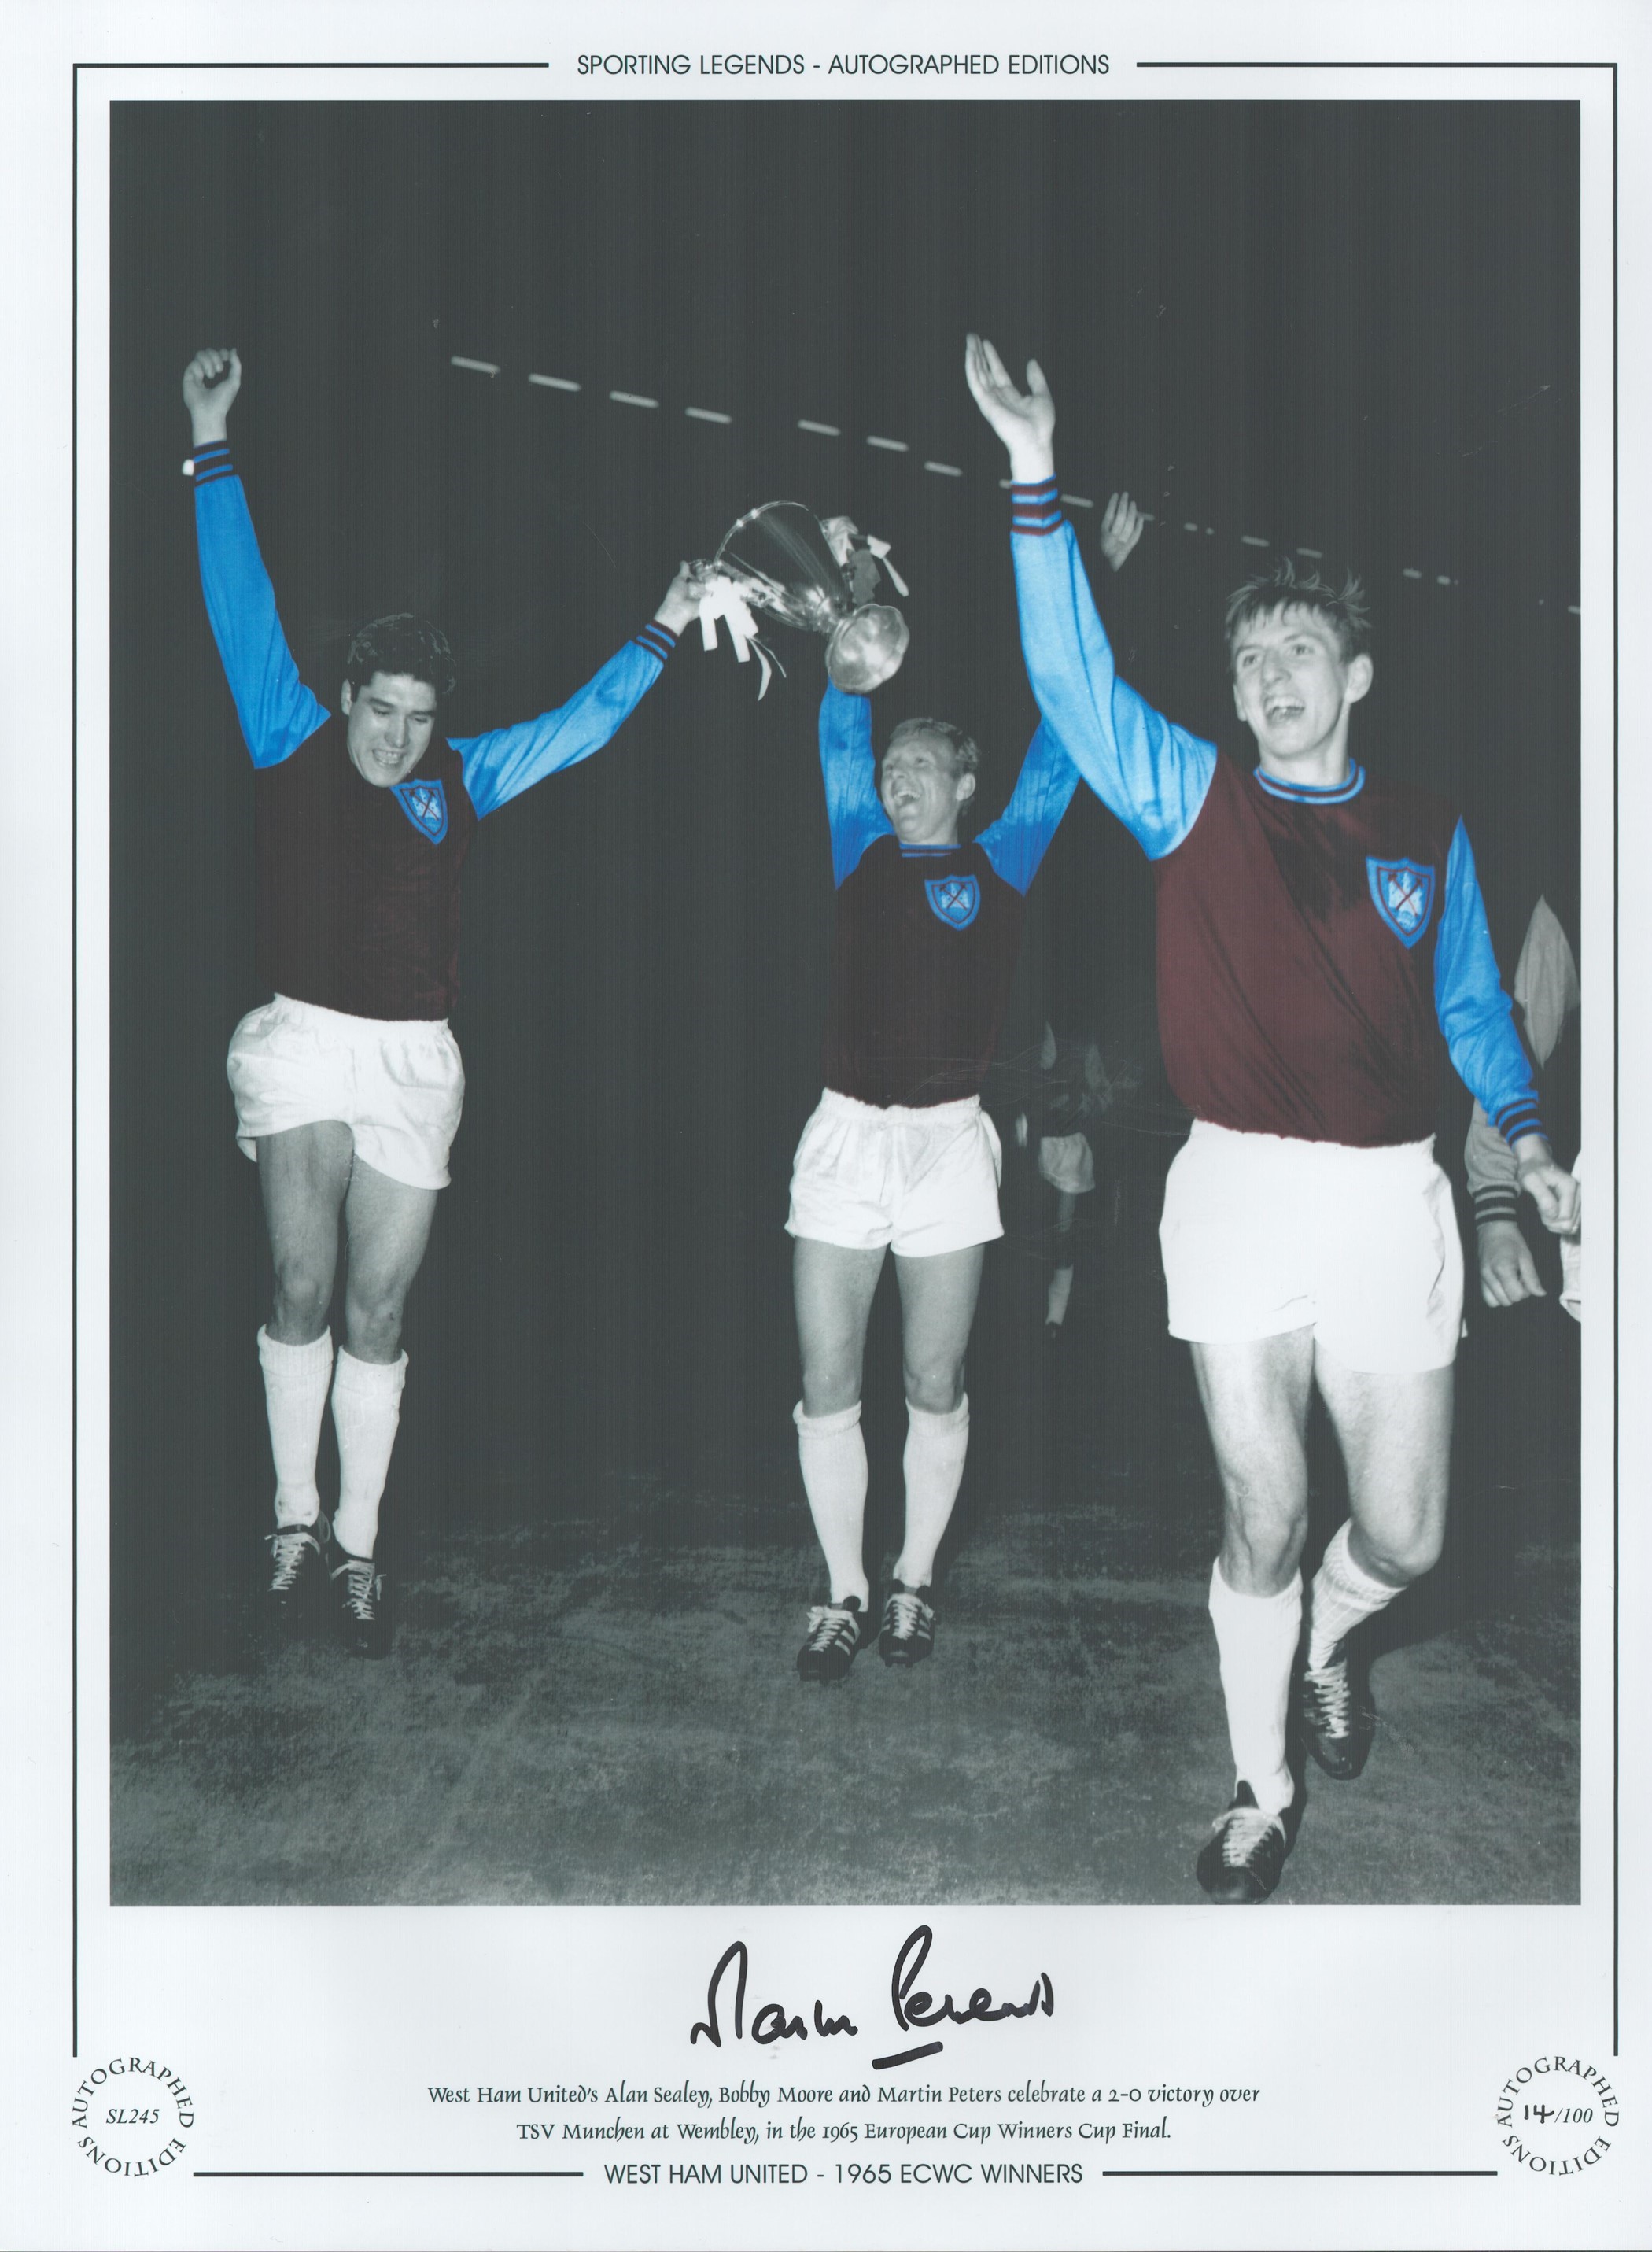 Martin Peters 16x12 handsigned colourised, Black and white photo, Autographed Editions, Limited